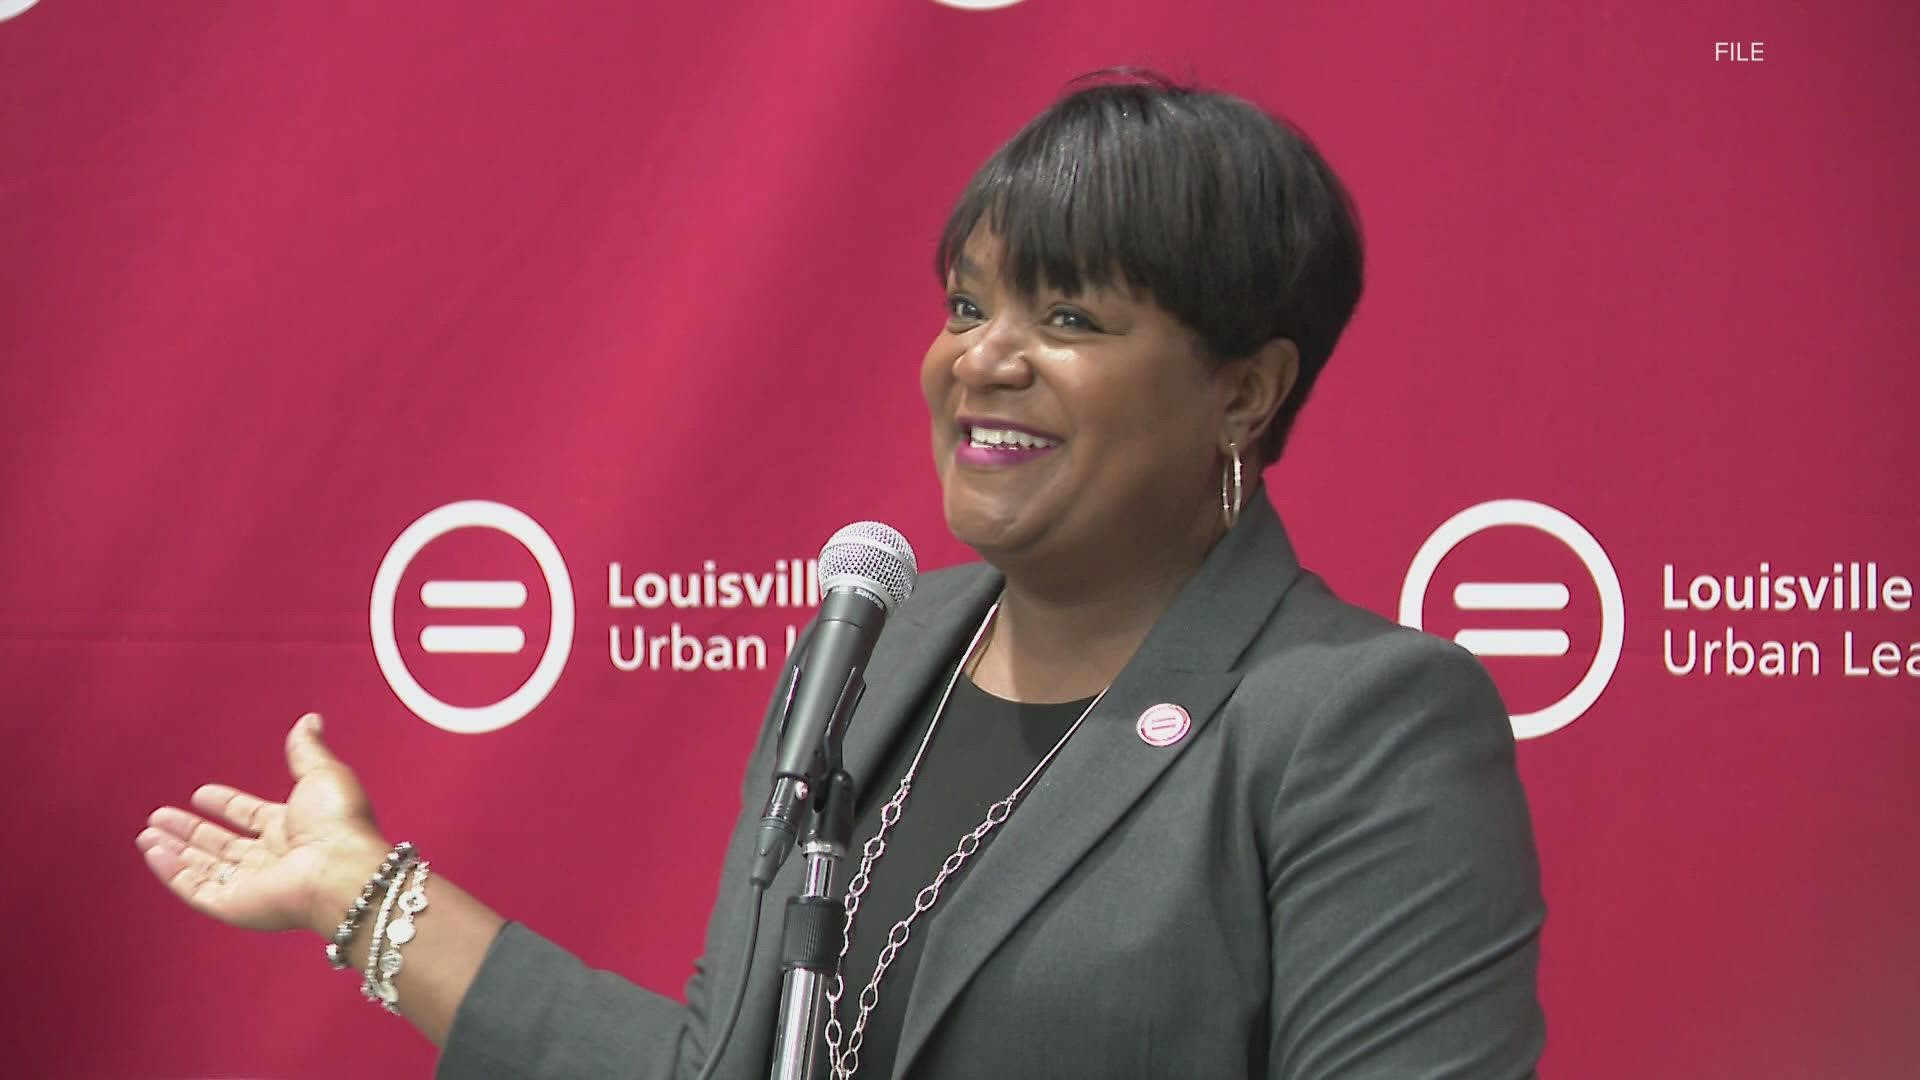 Kentucky Rep. John Yarmuth was singing the praises of former Louisville Urban League CEO Sadiqa Reynolds; she officially steps down from the role in October.